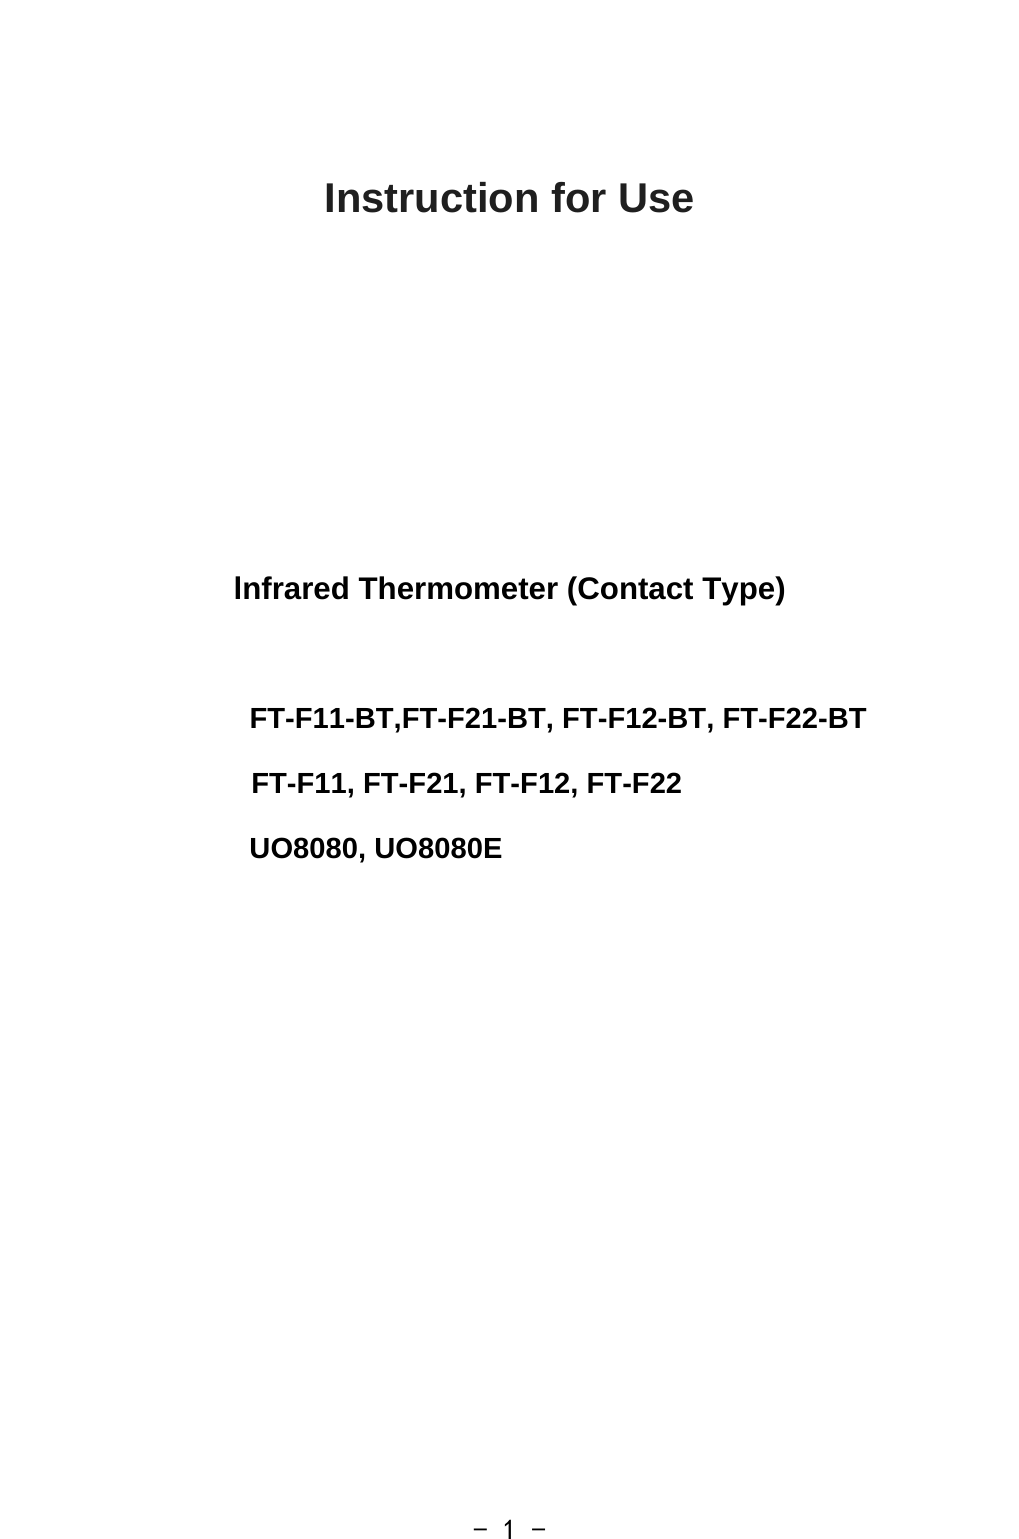 Surpeer infrared thermometer user manual